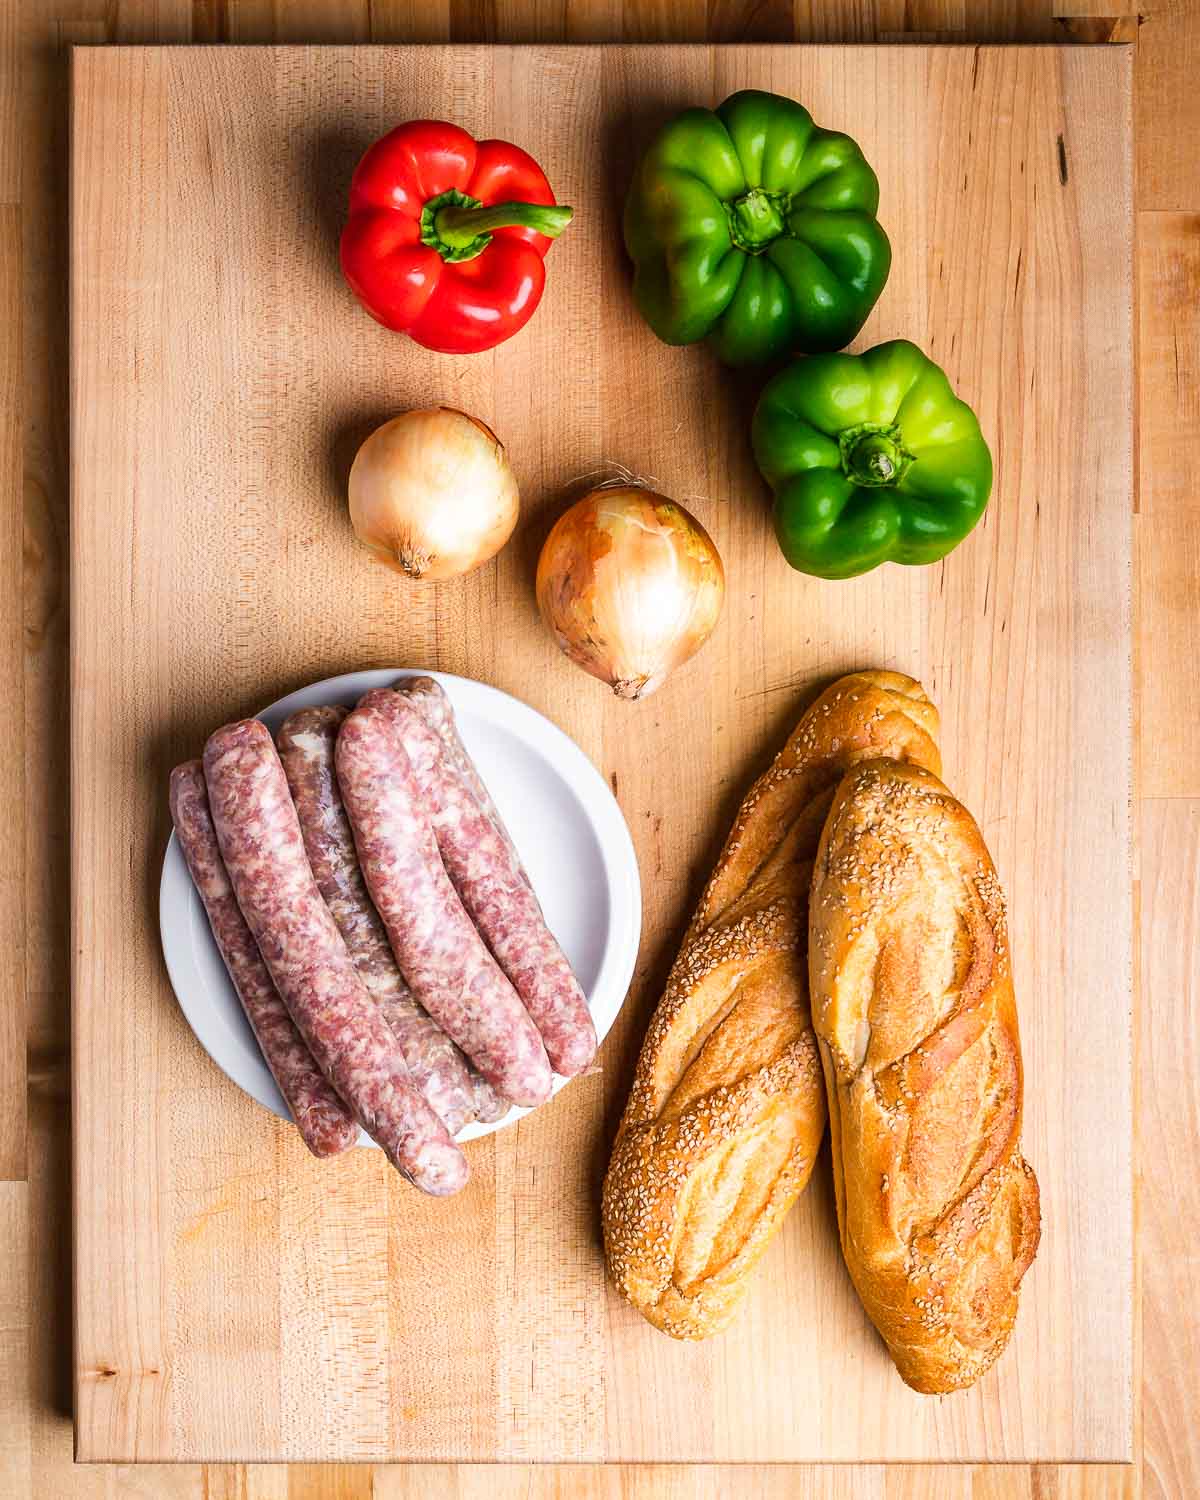 Ingredients shown: red and green bell peppers, onions, Italian sausage links, and Italian bread.